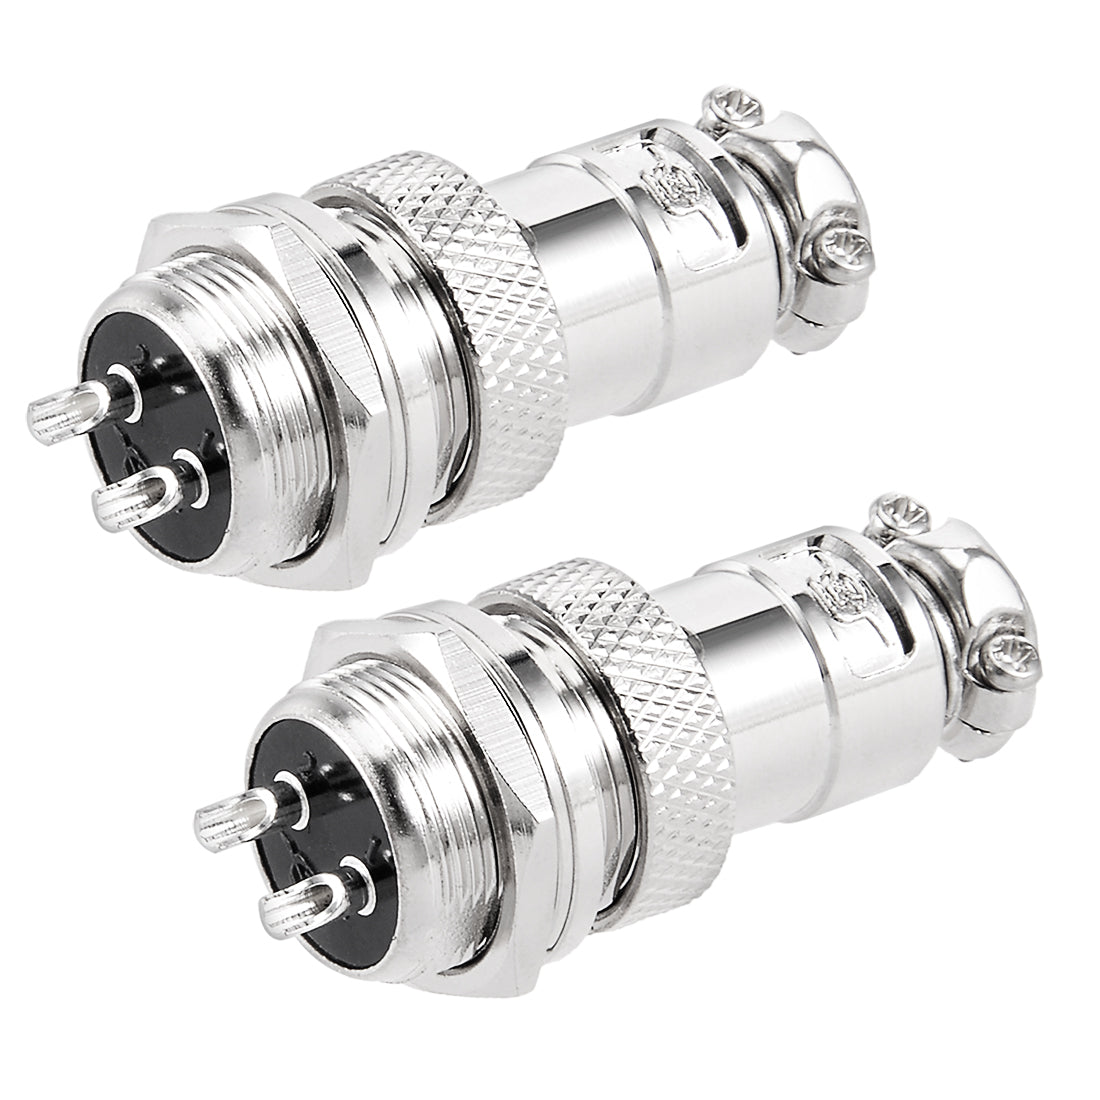 uxcell Uxcell Aviation Connector, 16mm 2Terminals 7A 125V 16M-2 Waterproof Male Wire Panel Power Chassis Metal Fittings Connector Aviation Silver Tone 2PCS